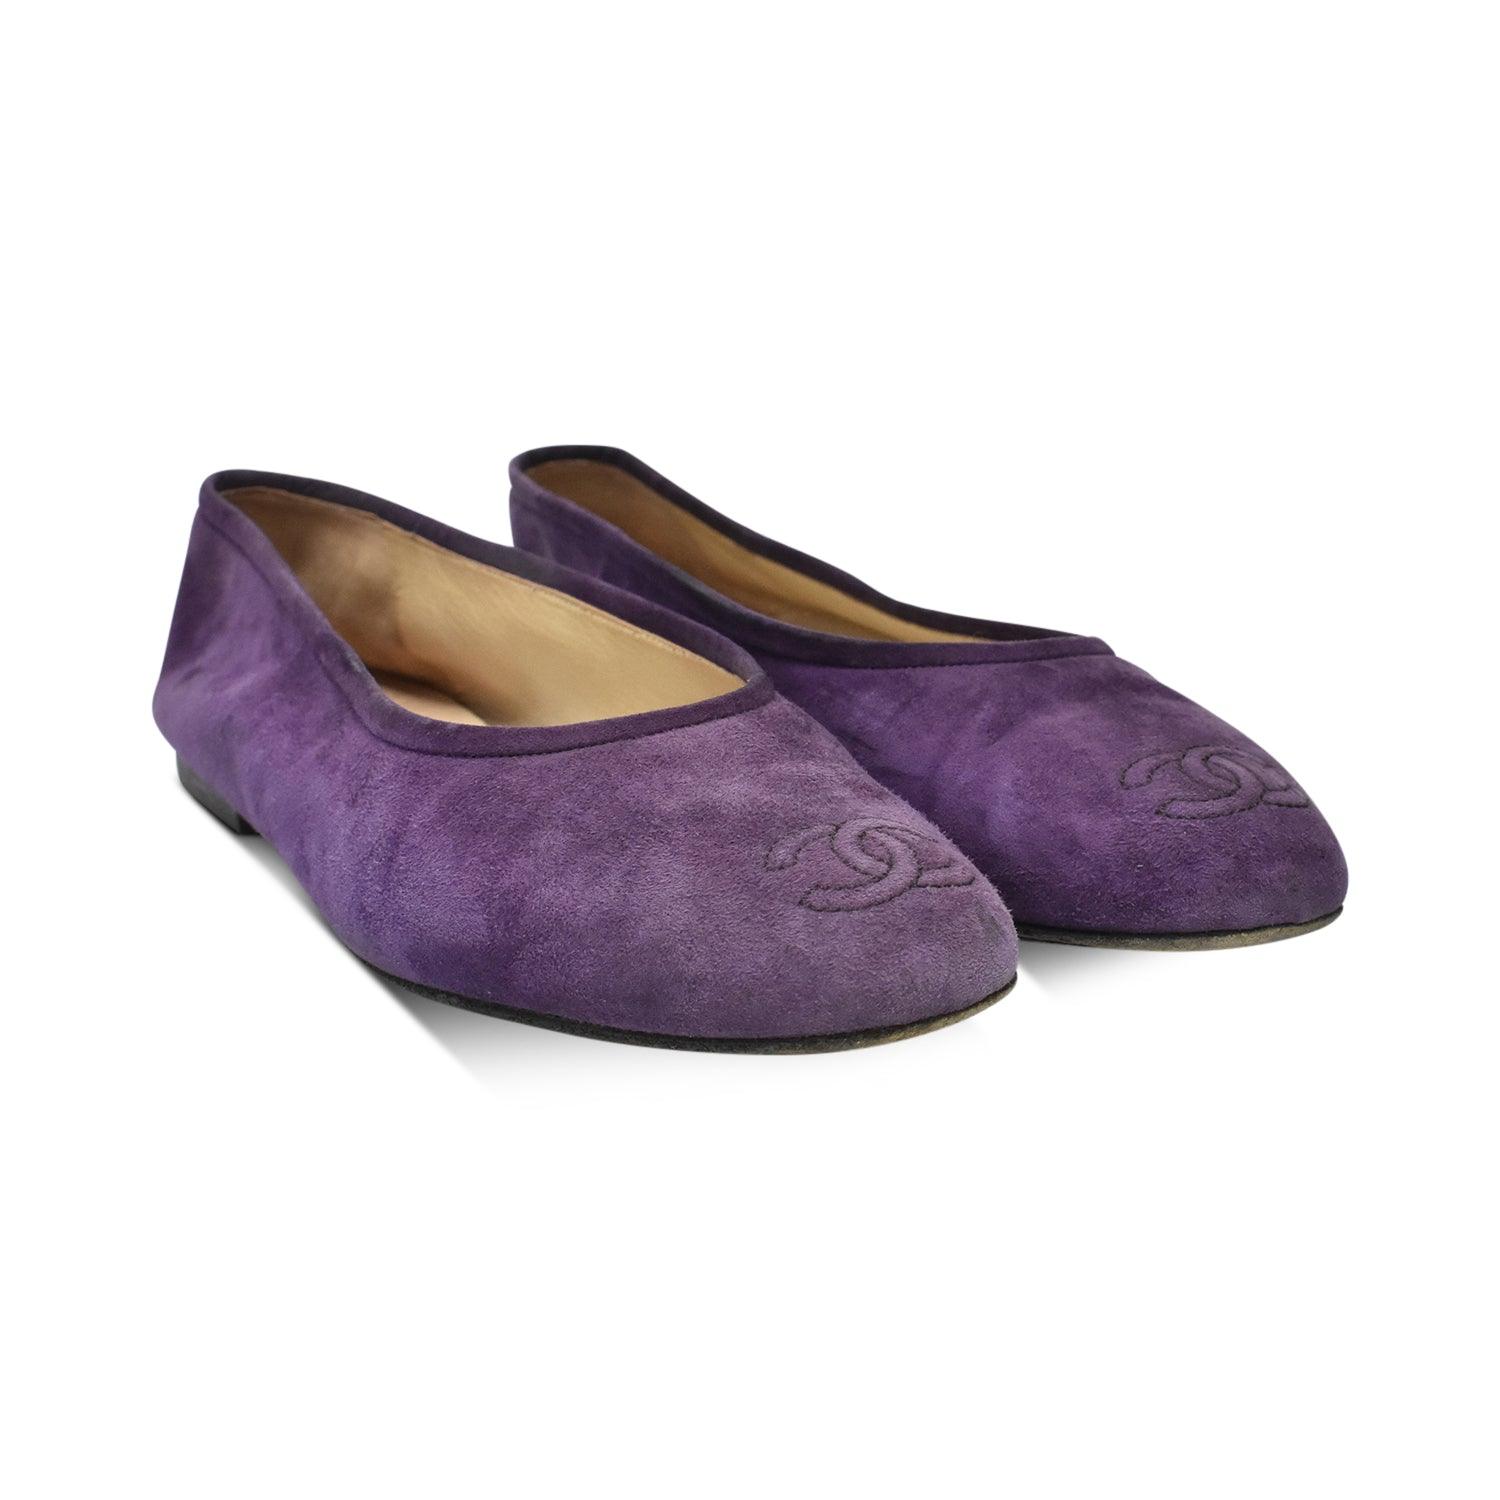 Chanel Flats - Women's 38.5 - Fashionably Yours